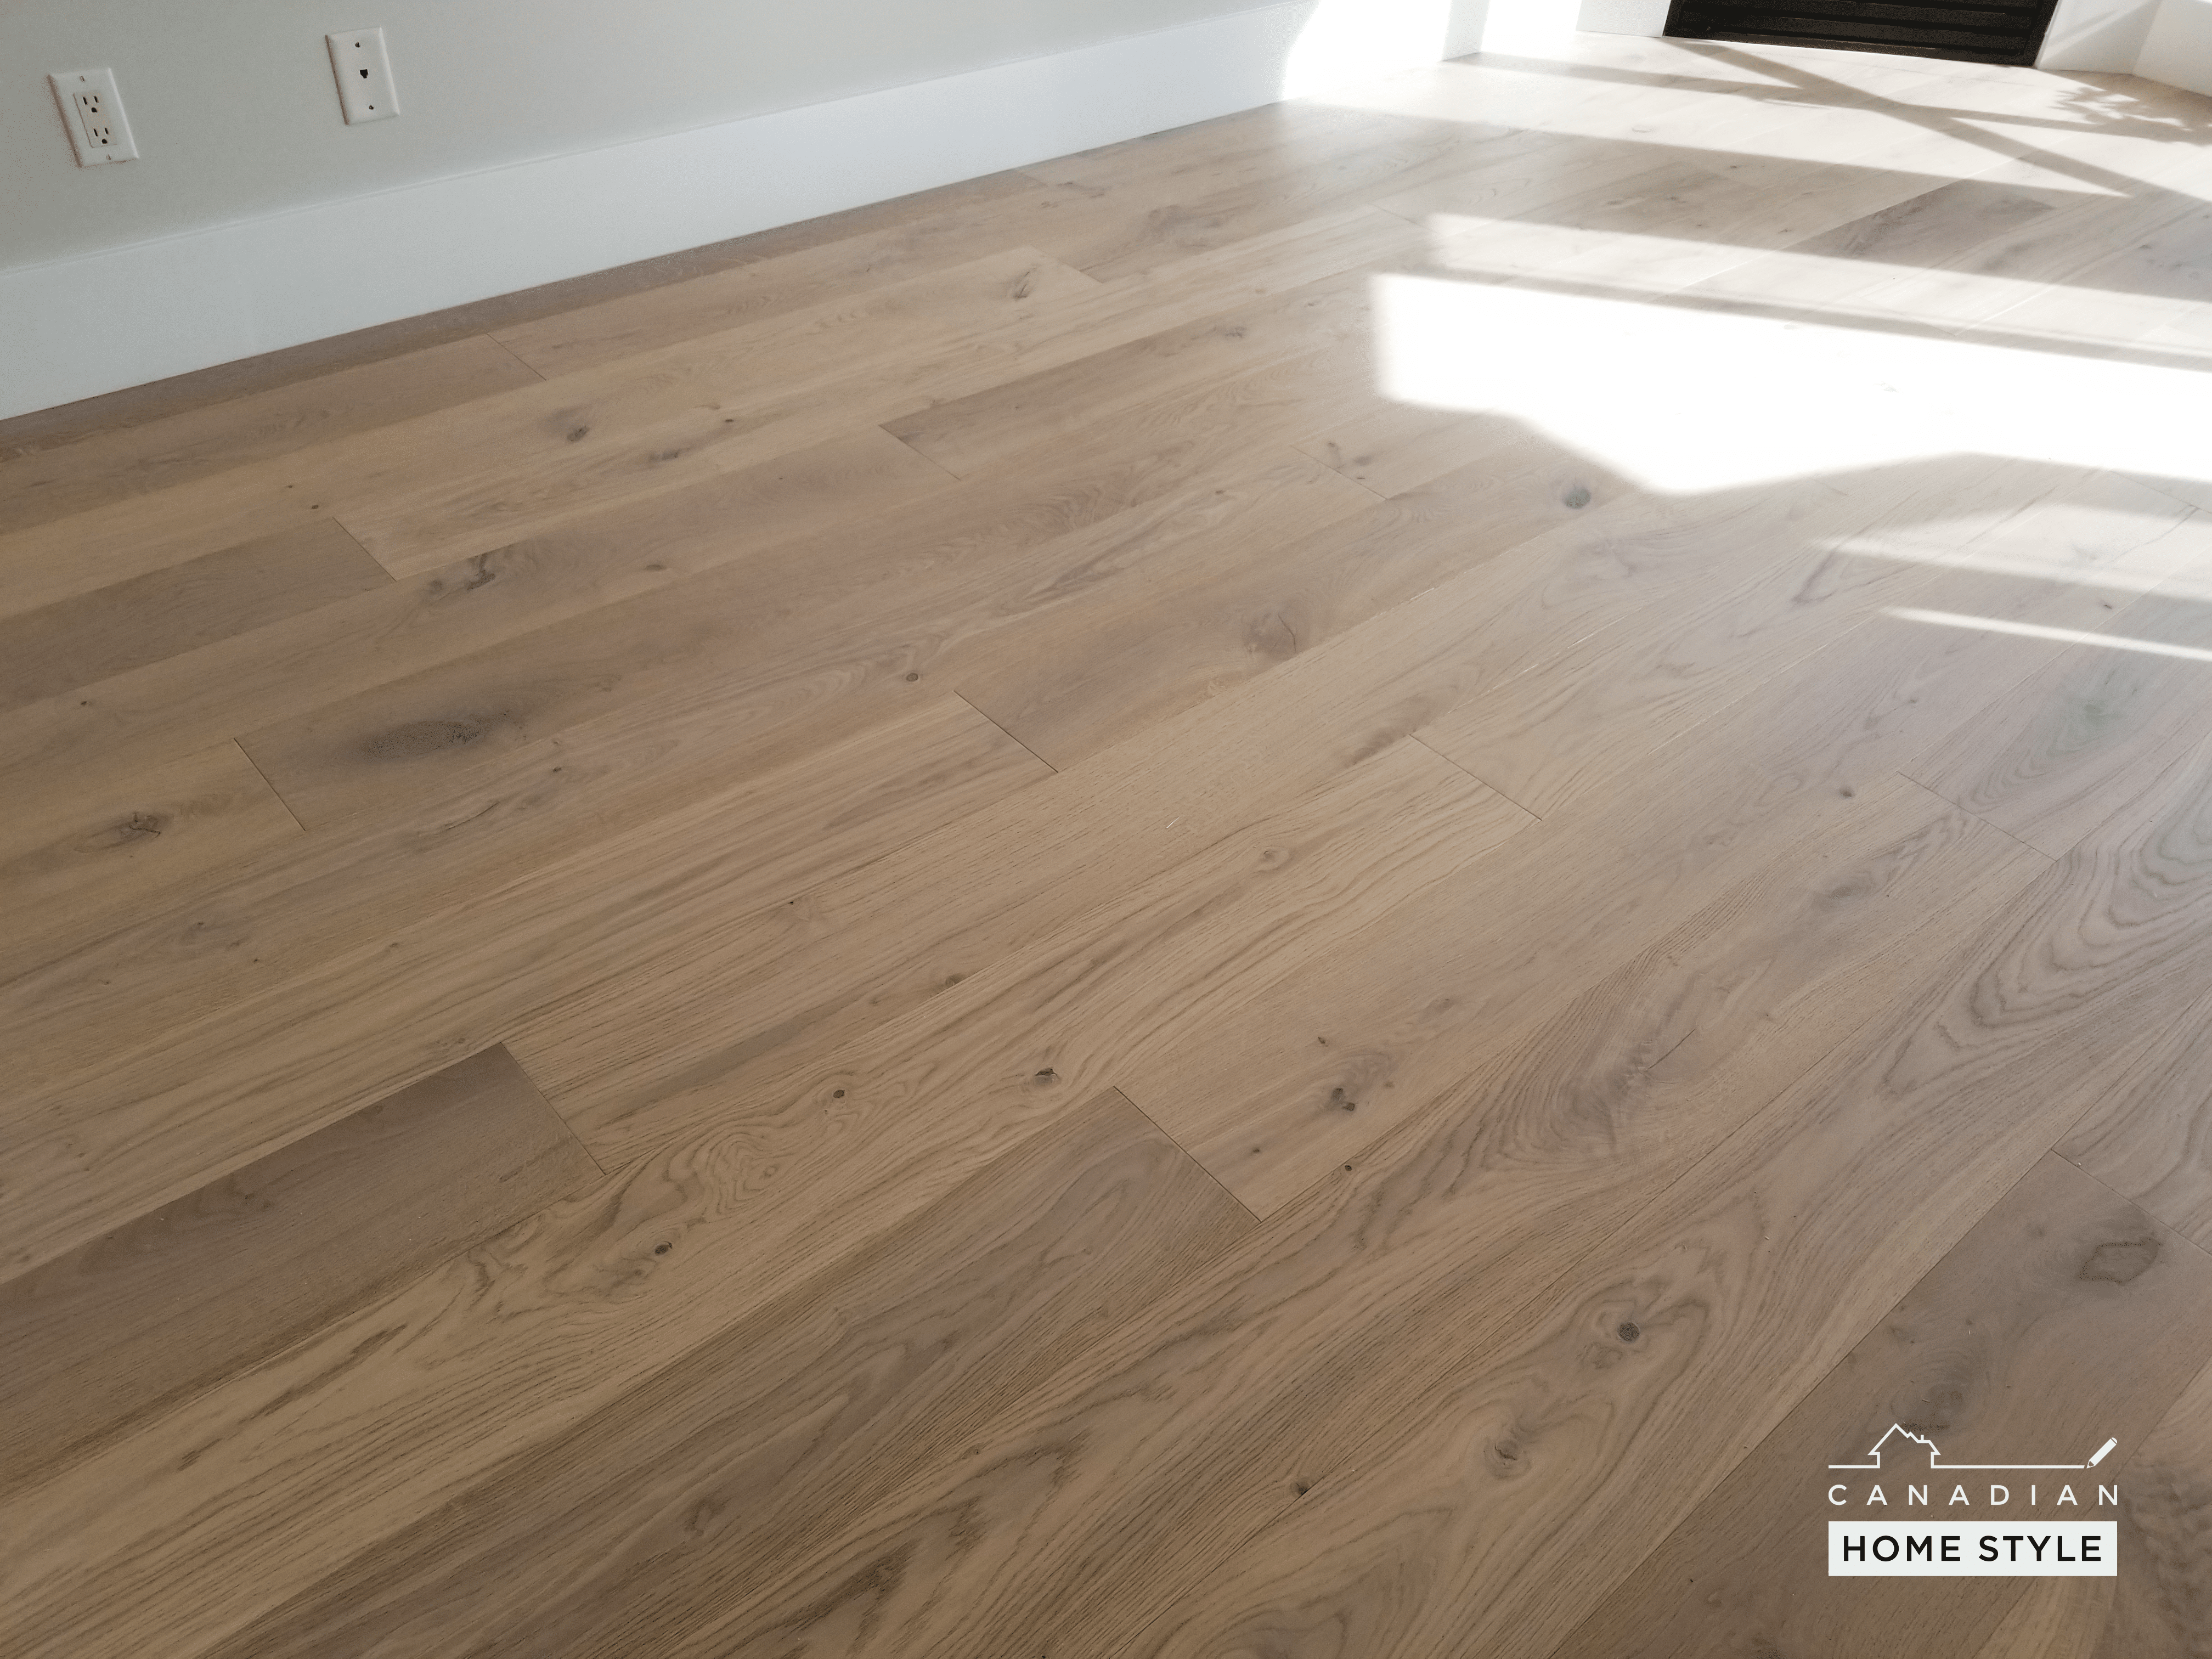 High-gloss finished wooden floors for Vancouver spaces